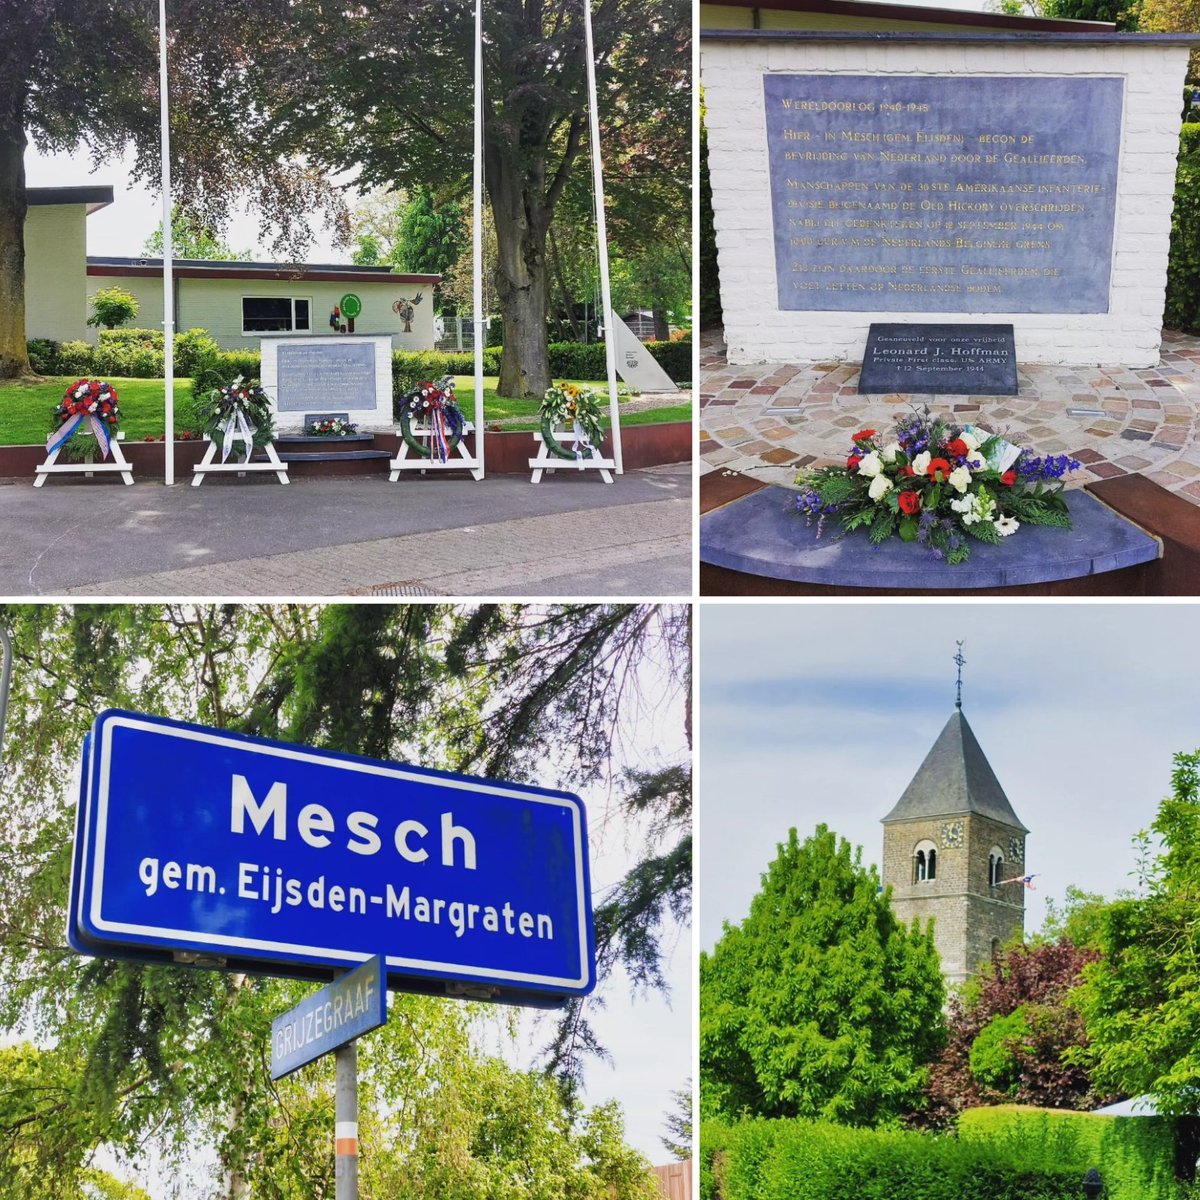 Although accounts differ it is believed that Mesch was the first Dutch village that was liberated during the Second World War in September 1944. It was liberated by the Americans.

#historyhustle #ww2 #wwii #worldwar2 #worldwartwo #secondworldwar #limburg #zuidlimburg #mesch